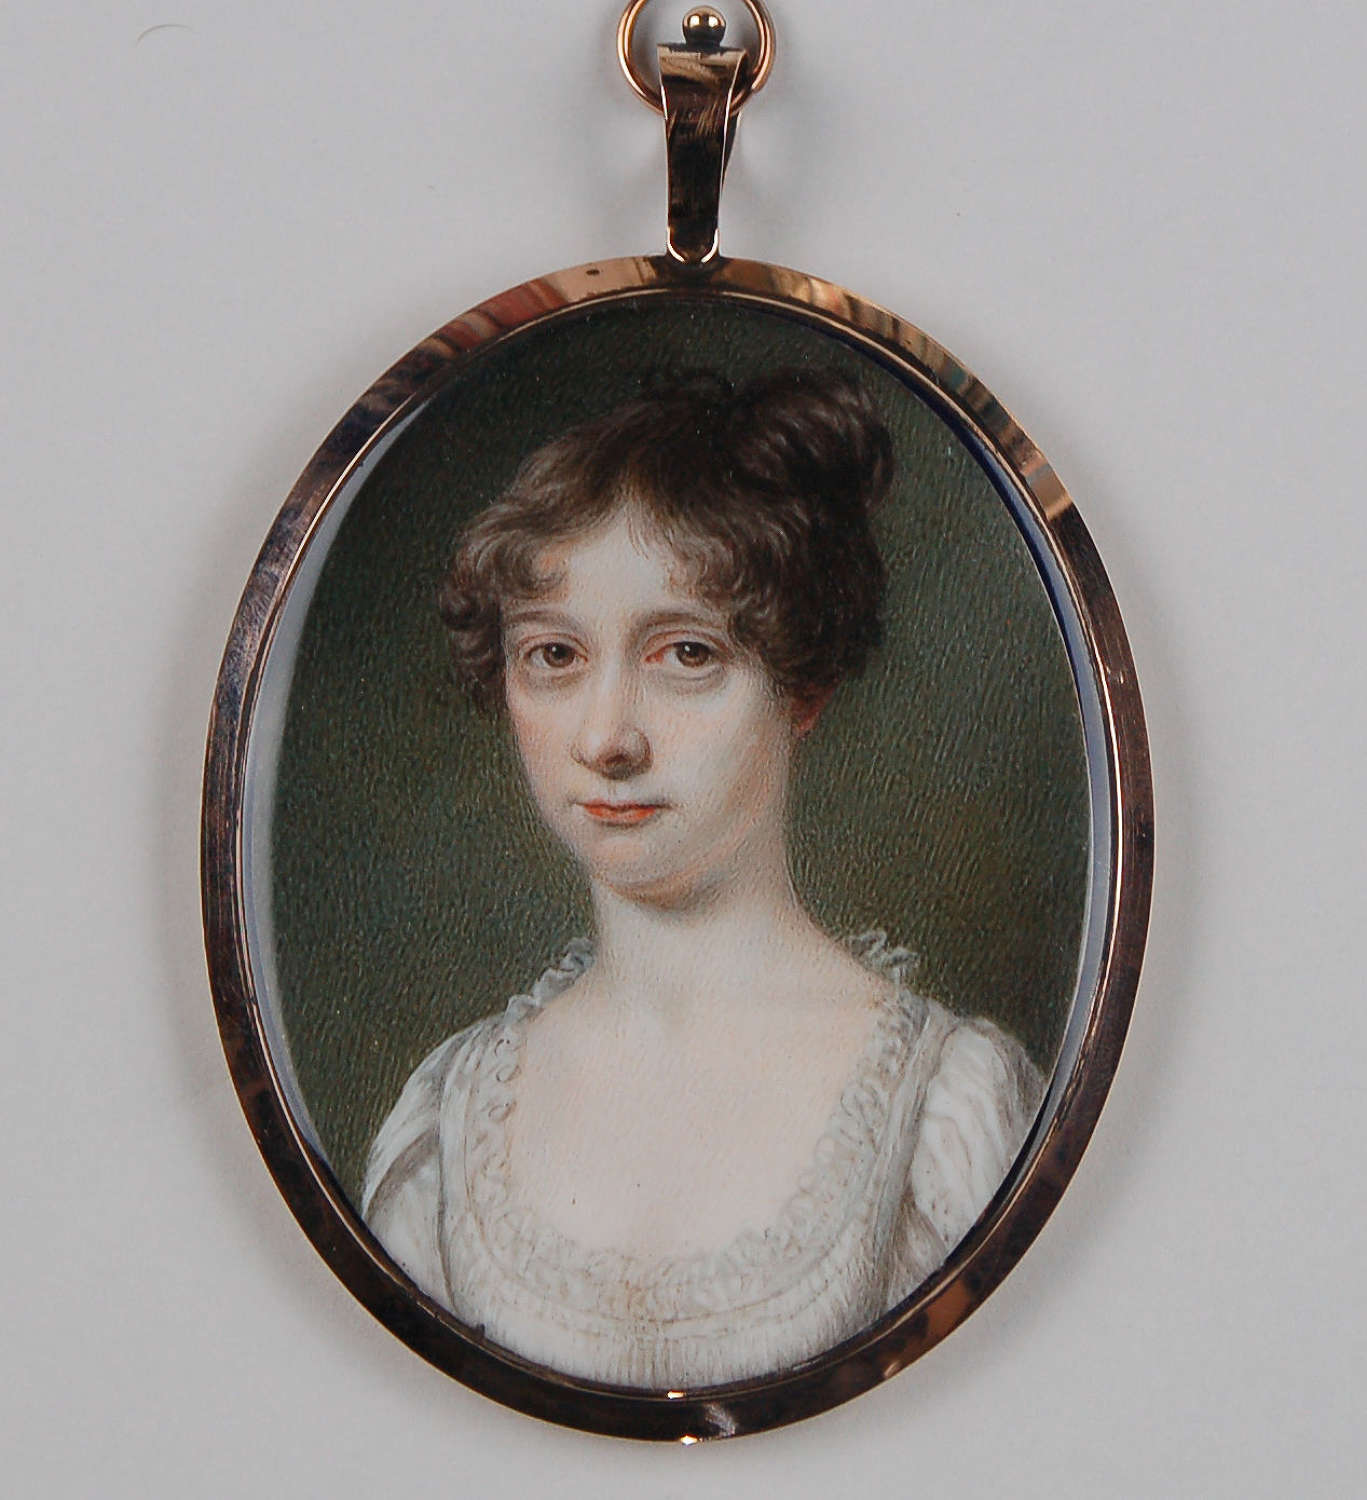 Miniature of a lady by Naish C1800